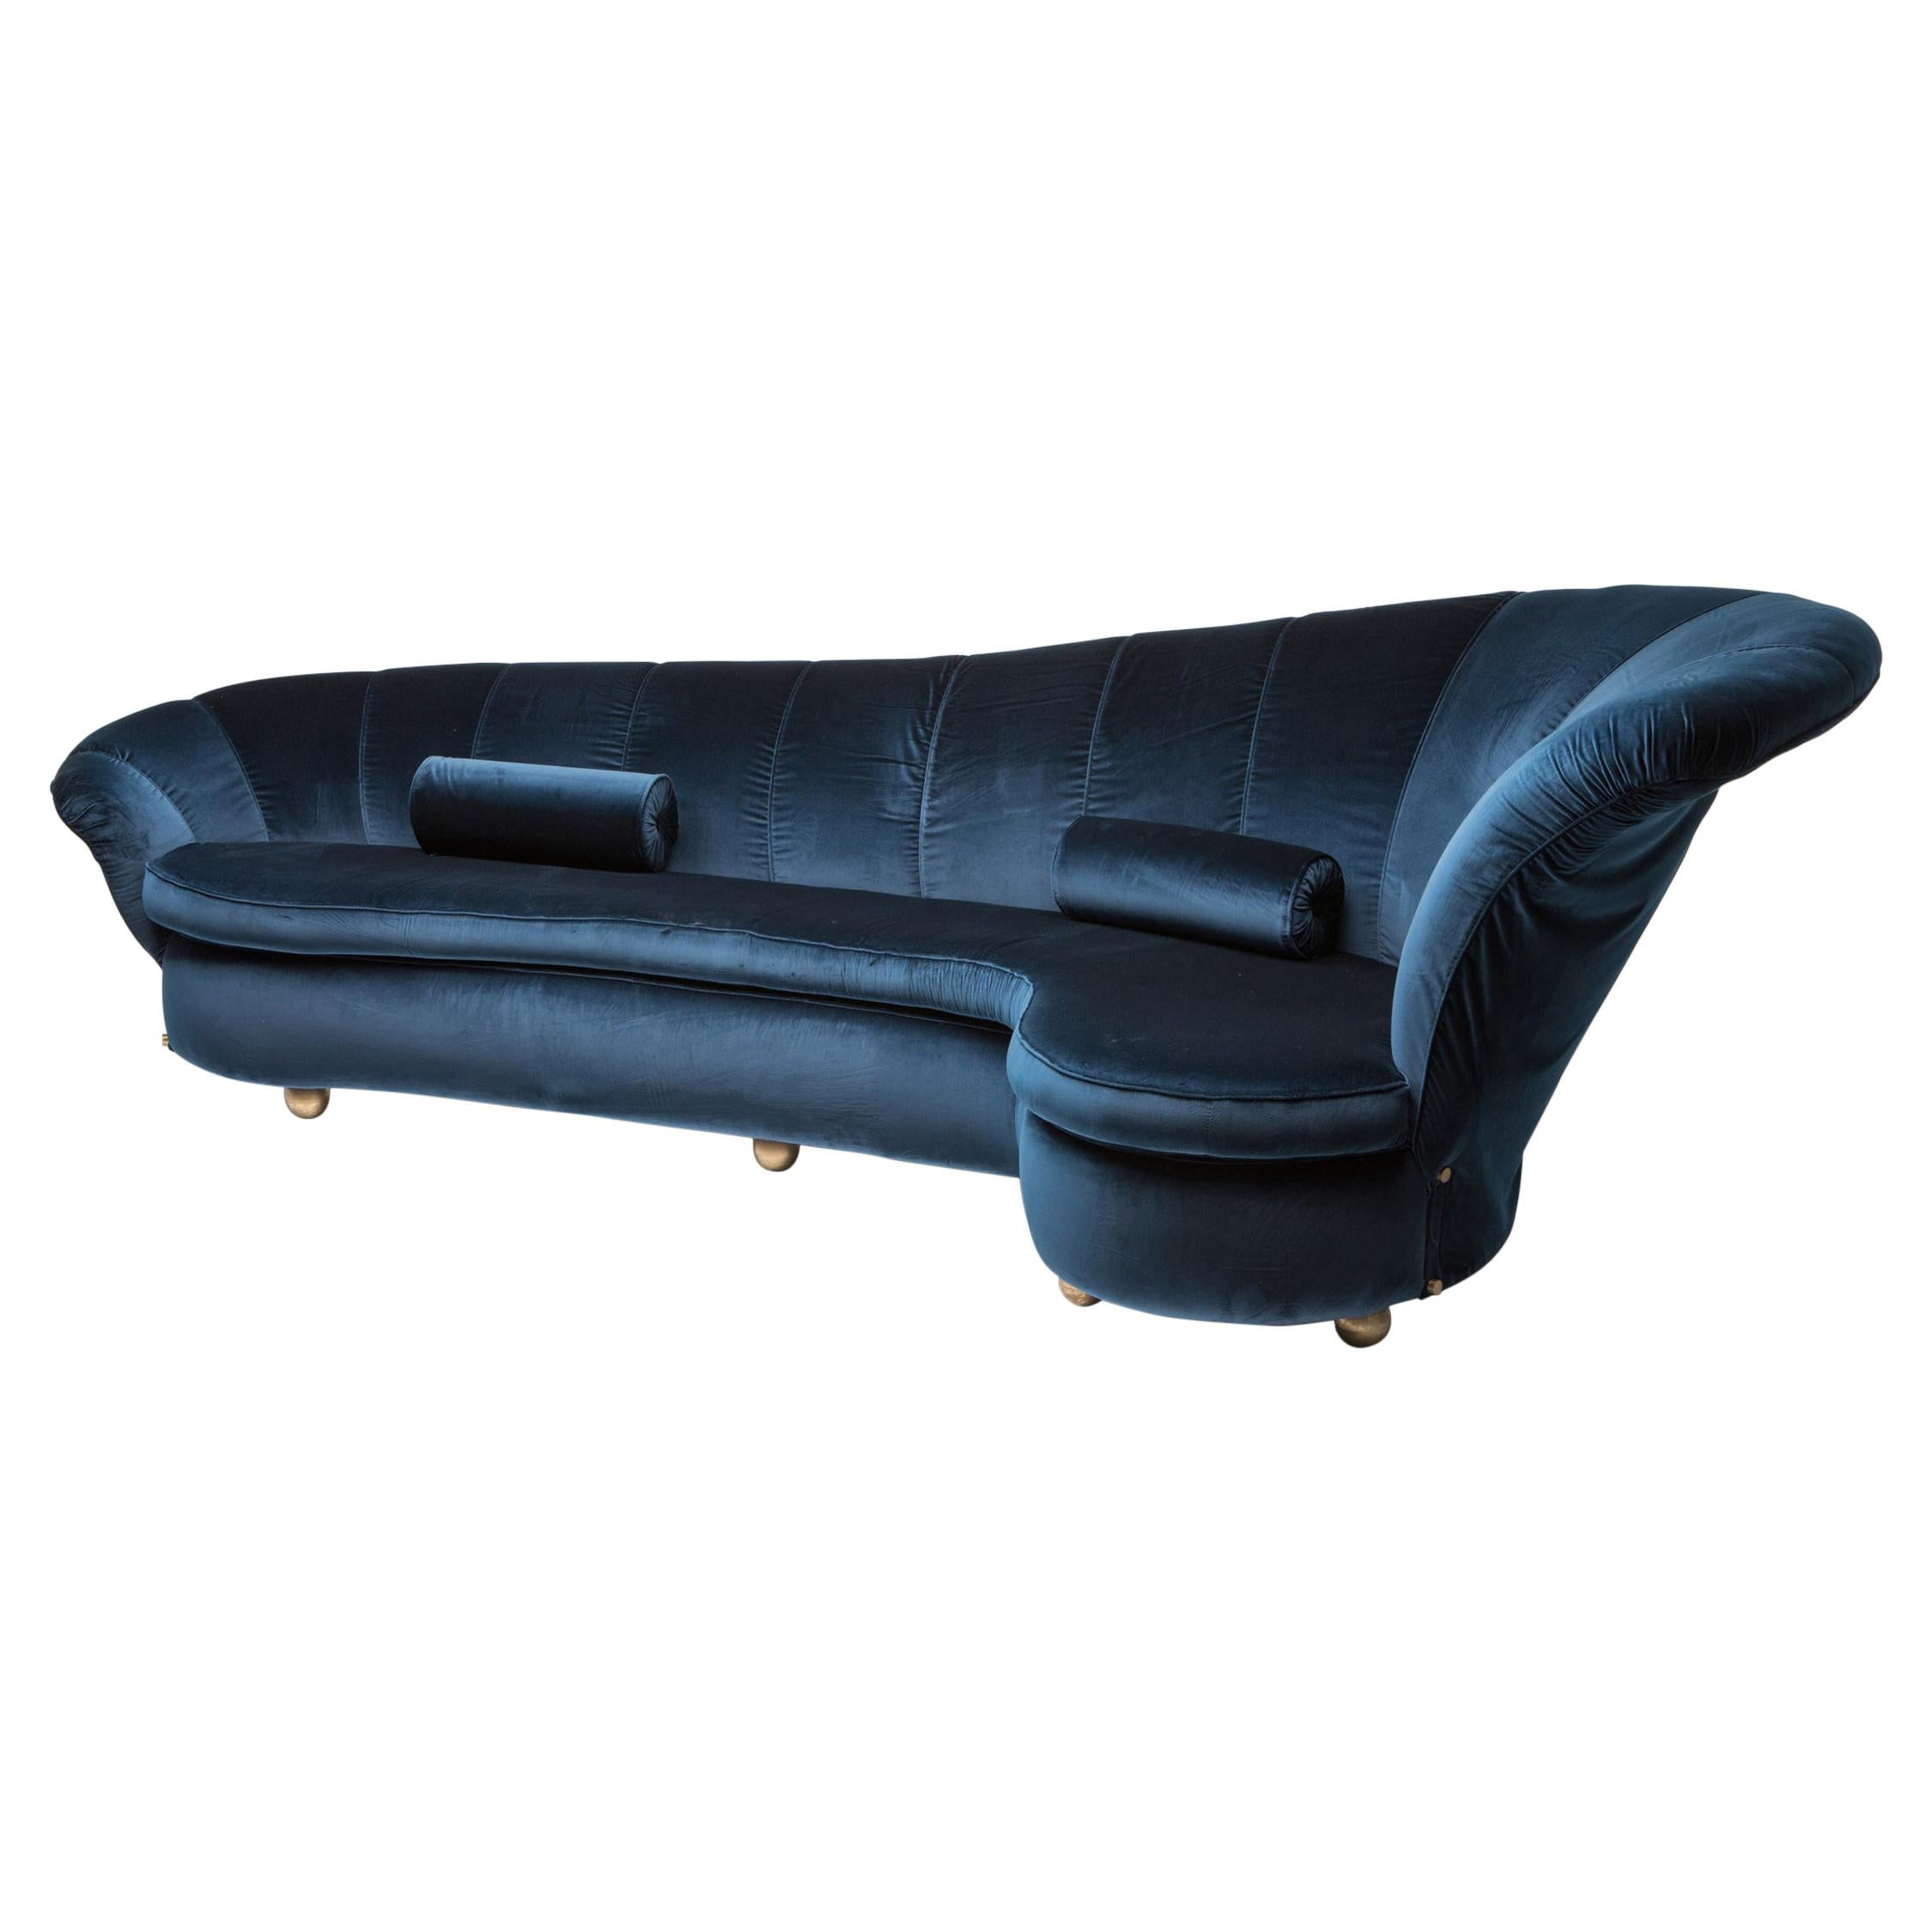 Italian glam couch, newly reupholstered blue velvet, round brass feet, attributed to Marzio Cecchi, circa 1970s, Italy

This piece has been reupholstered in a marvelous chic dark blue velvet which works really well with the round brass